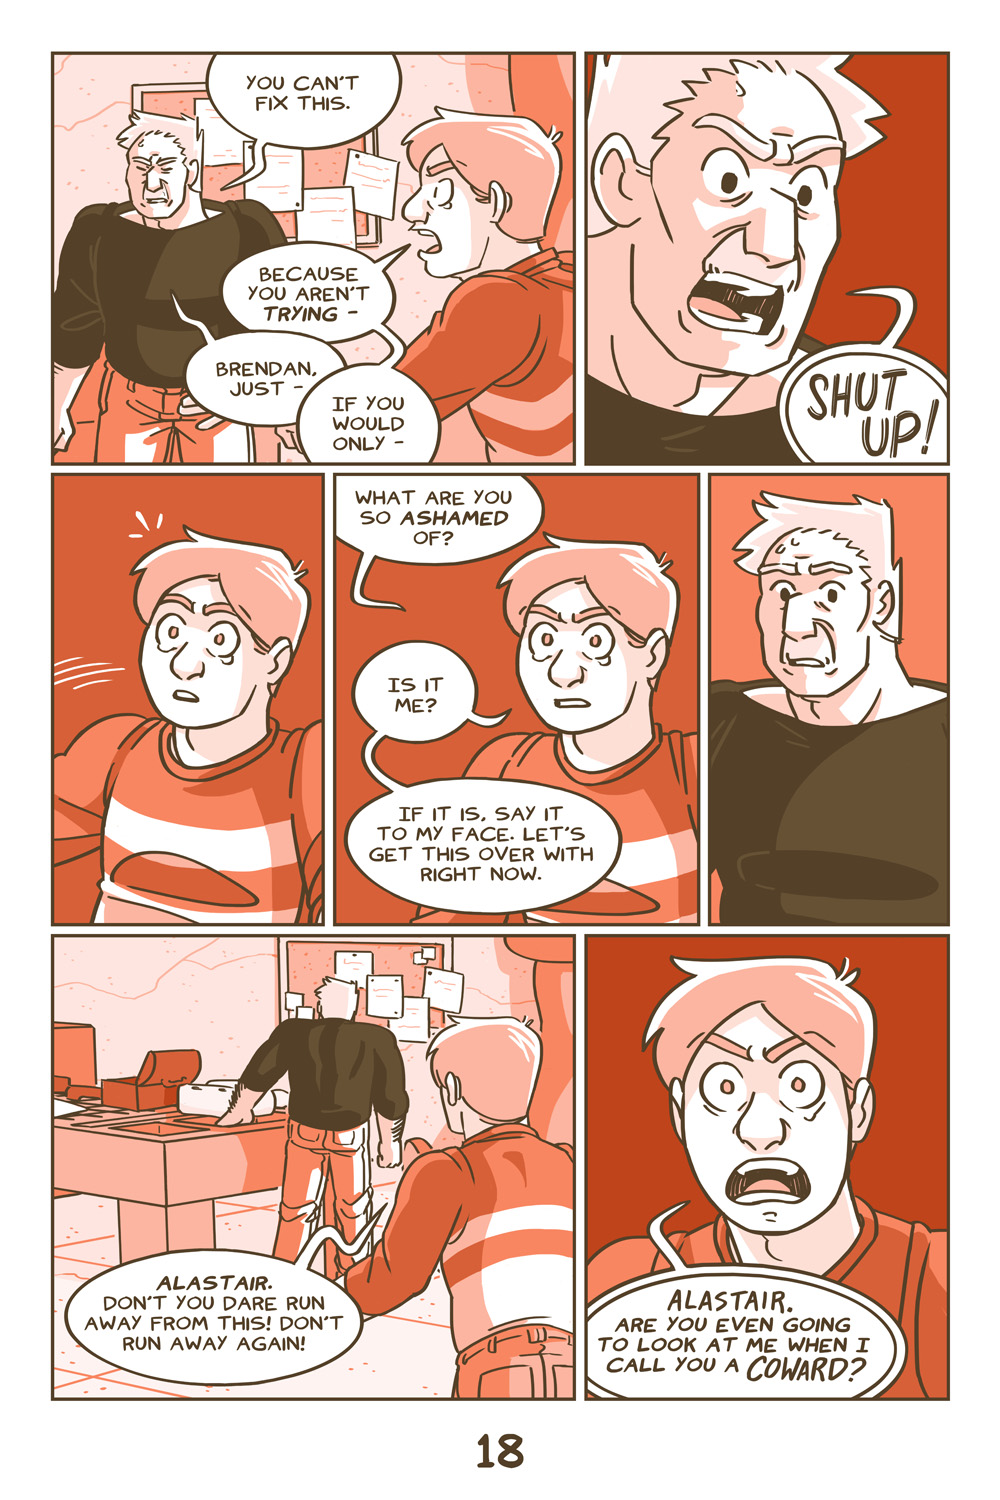 Chapter 5, Page 18